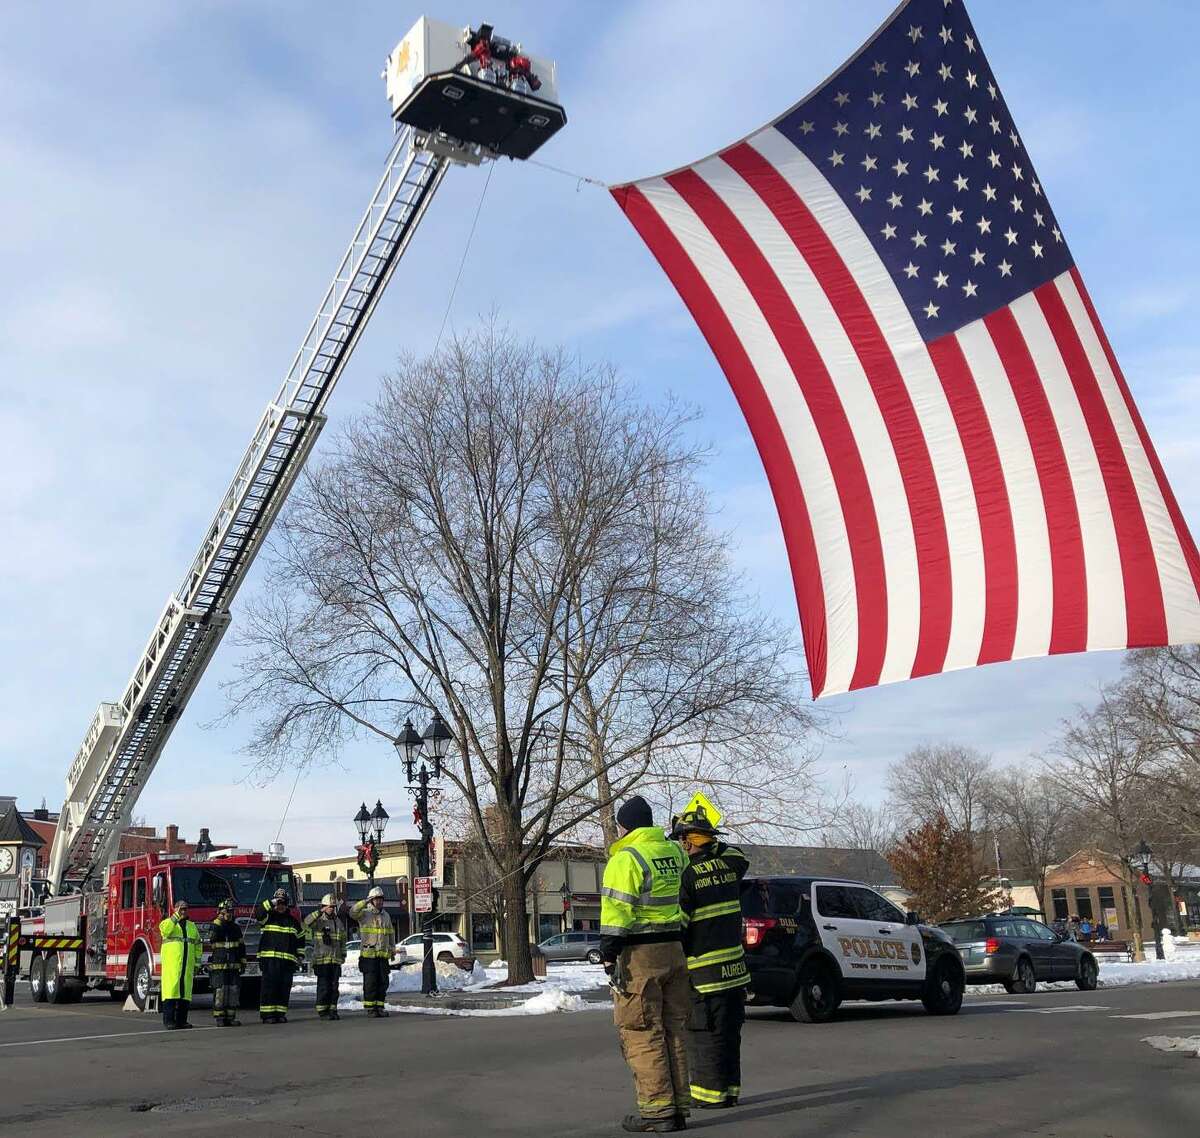 Spectrum/ A large American flag draped across the north side of Main Street in New Milford last Friday, Dec. 6, 2019, paid tribute to Ronald J. Adams of New Milford. Adams, 71, died Nov. 29 at his home. Firefighters from Water Witch Hose Co. #2 in New Milford and Newtown fire department hung the flag between New Milford’s Tower 25 and Newtown’s Truck 14 from the crossover near the bandstand to Church Street. A member of Iron Works Local #40, Adams had been of the construction of the World Trade Center. After 9/11, Adams stepped up and was part of the rescue/recovery efforts, which contributed to his disease. Above, Water Witch members, from left to right, on left, Bob Golembeski, Al Tani, David Golembeski, Lt. Sean Delaney and Chief Jim Ferlow, as vehicles in the procession make their way beneath the flag. New Milford Tower 25 and Newtown Truck 14